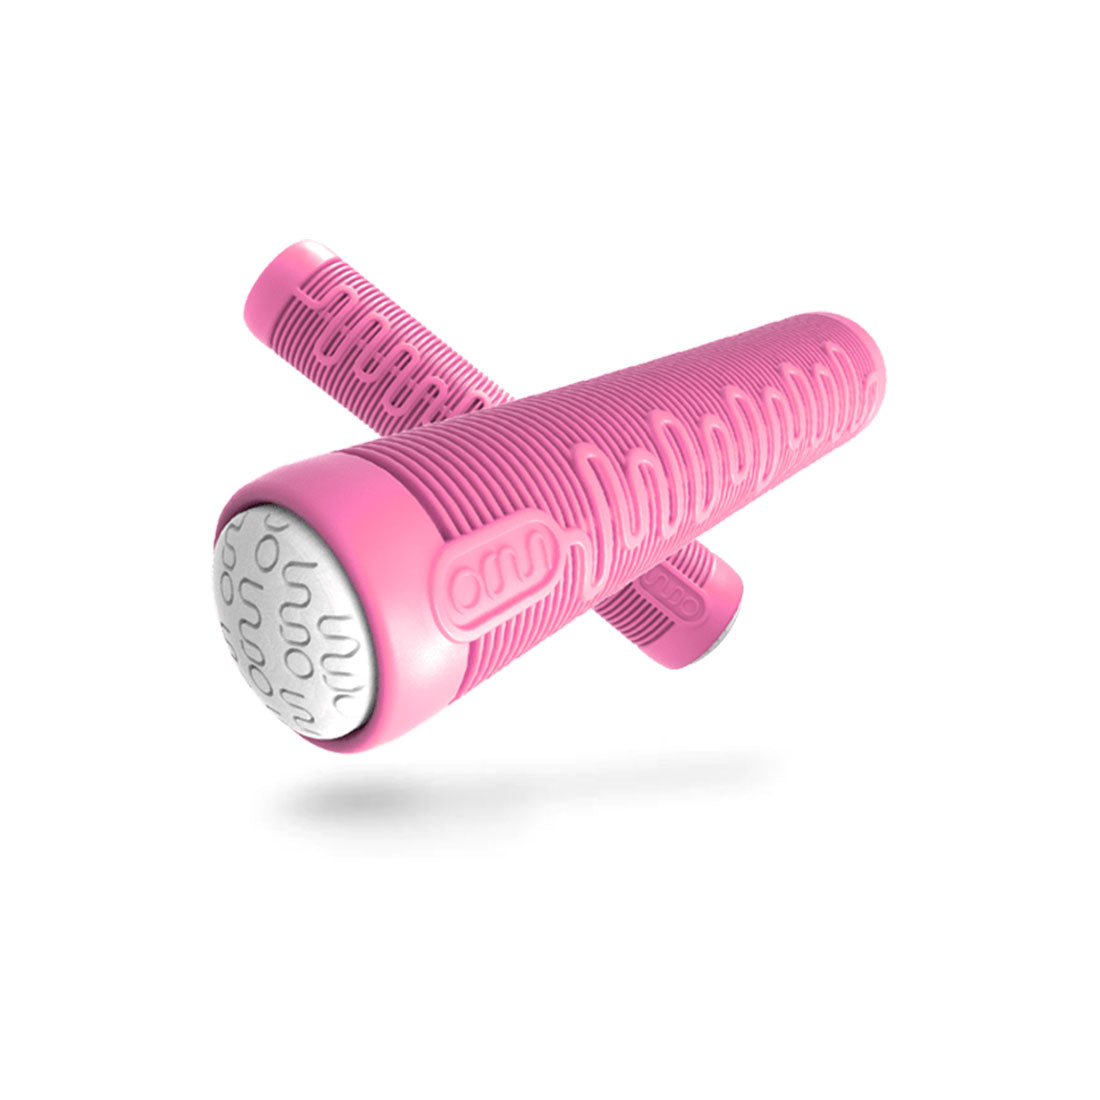 INDO Tramp Scooter Hand Grips Pink Pop Scooter Hardware and Parts